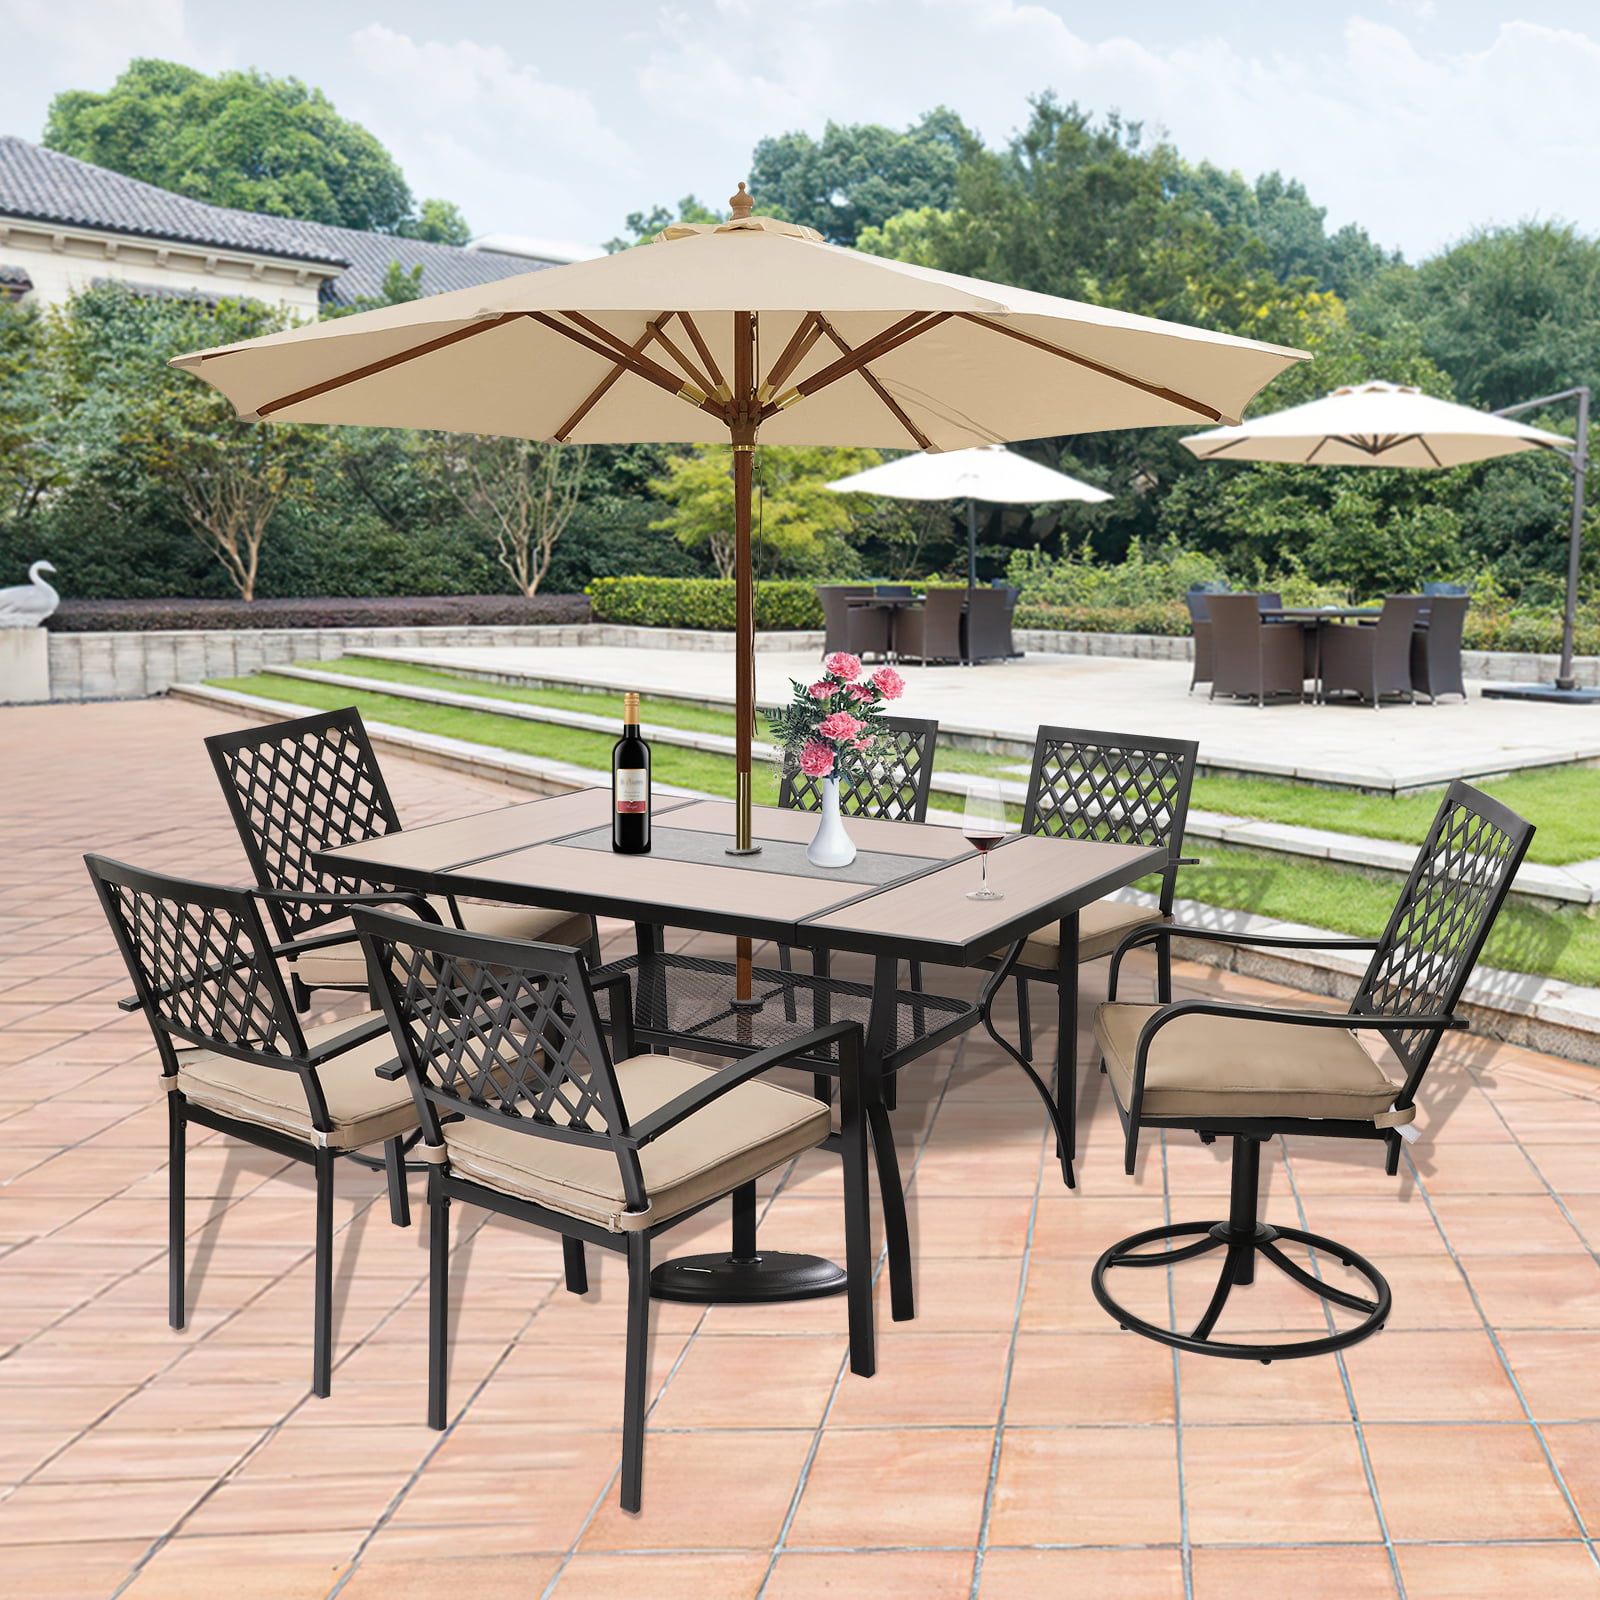 Outdoor Cafe Table Stacking Chairs Parasol Hole Home Garden Patio Furniture Set 